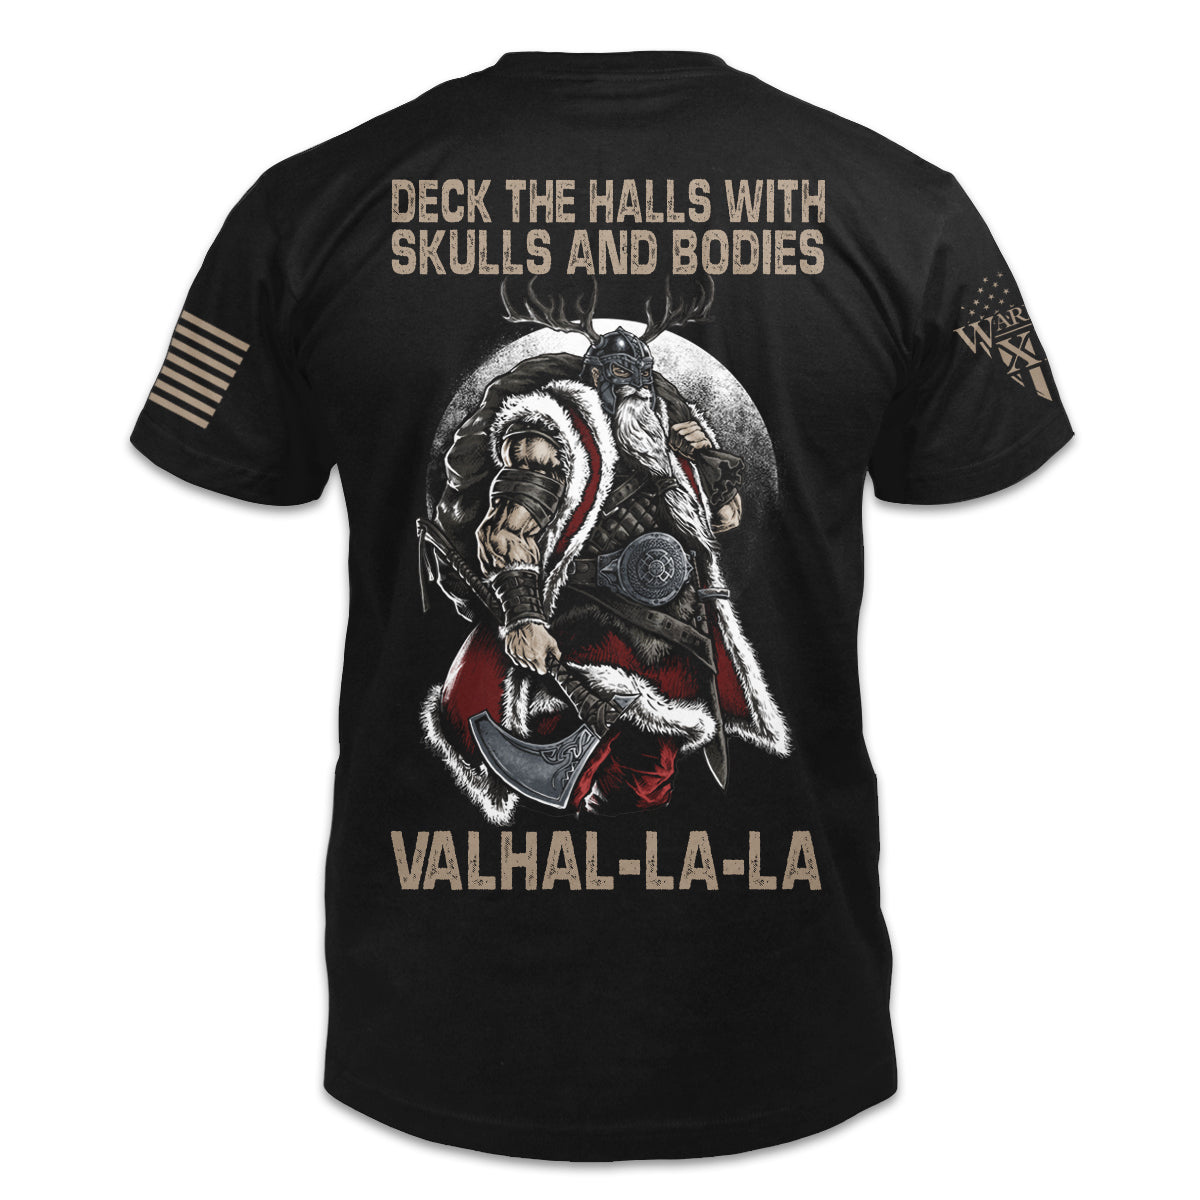 A black t-shirt with the words "Deck the halls with skulls and bodies, Valhal-La-La" and a viking printed on the back of the shirt.